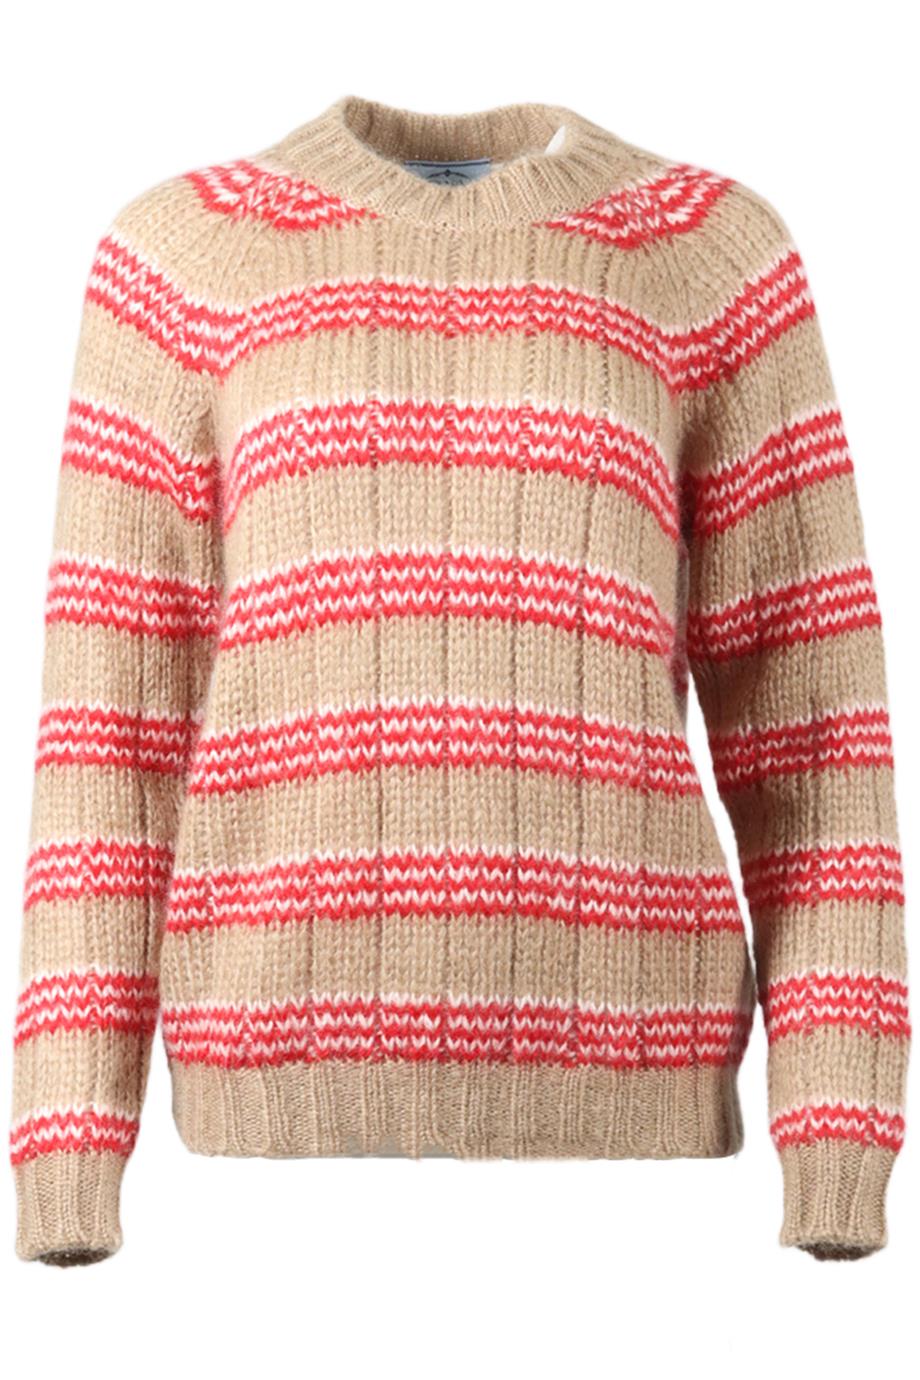 PRADA STRIPED MOHAIR AND WOOL BLEND SWEATER IT 40 UK 8